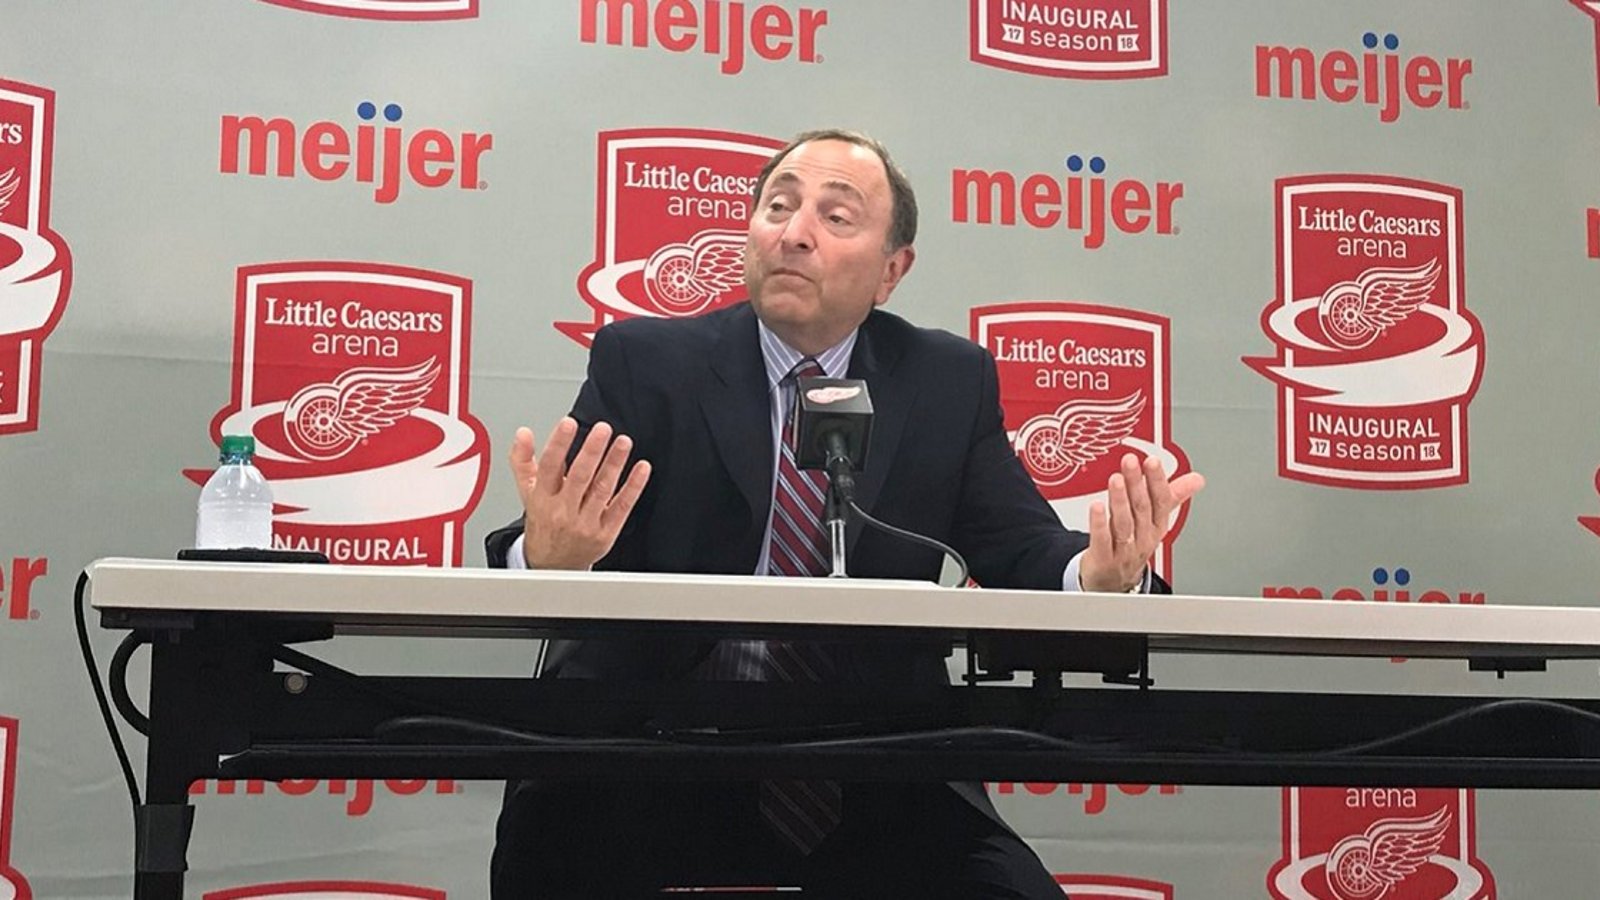 Breaking: Bettman makes a huge announcement during press conference in Detroit.